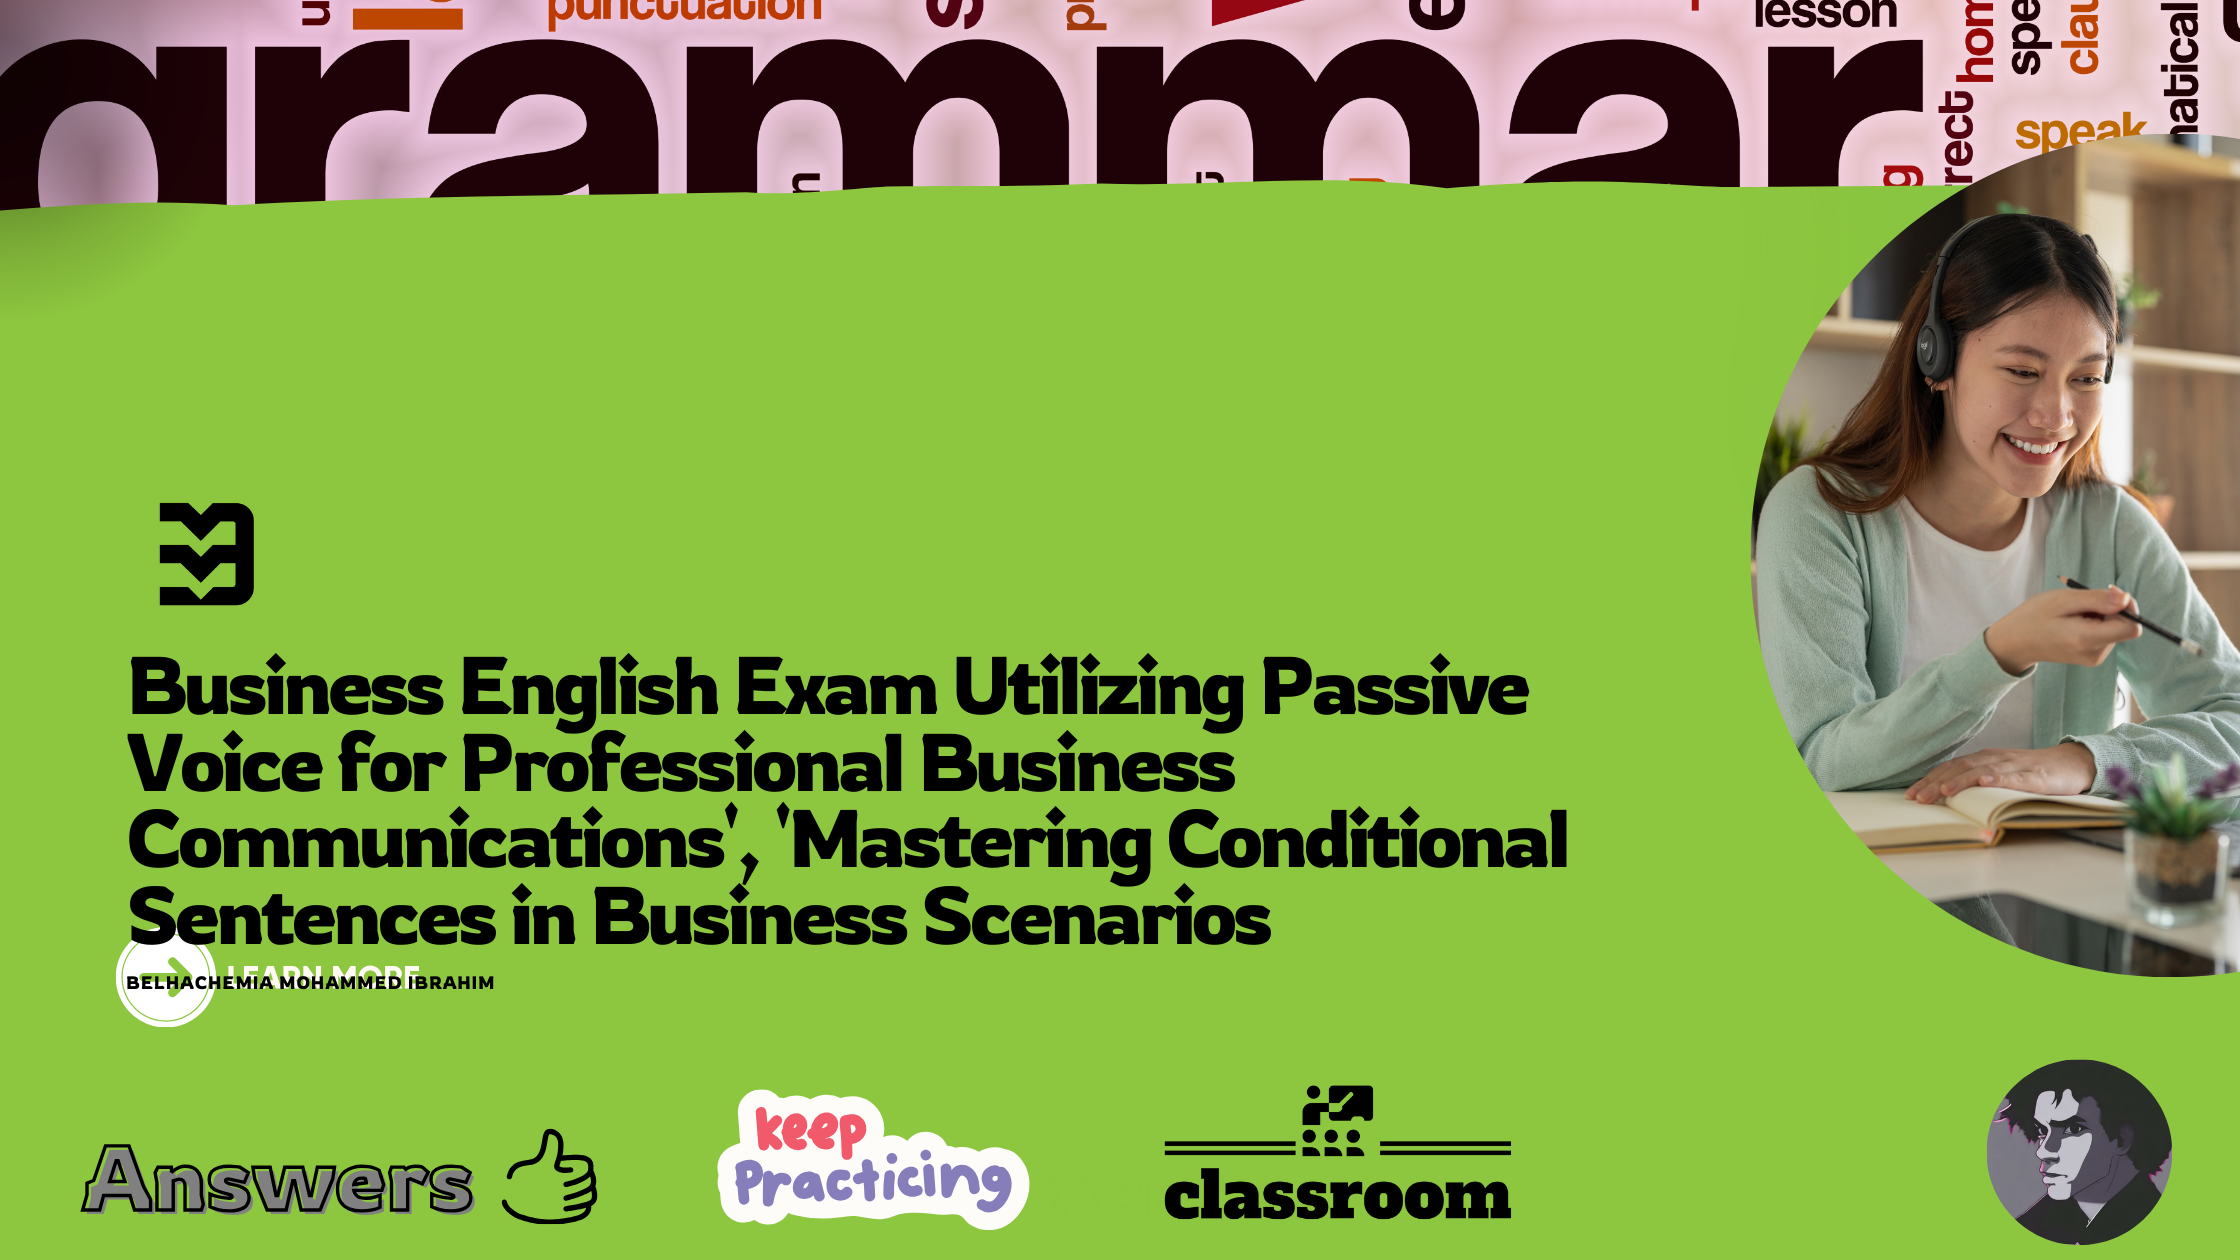 Business English Exam: Utilizing Passive Voice for Professional Business Communications, 'Mastering Conditional